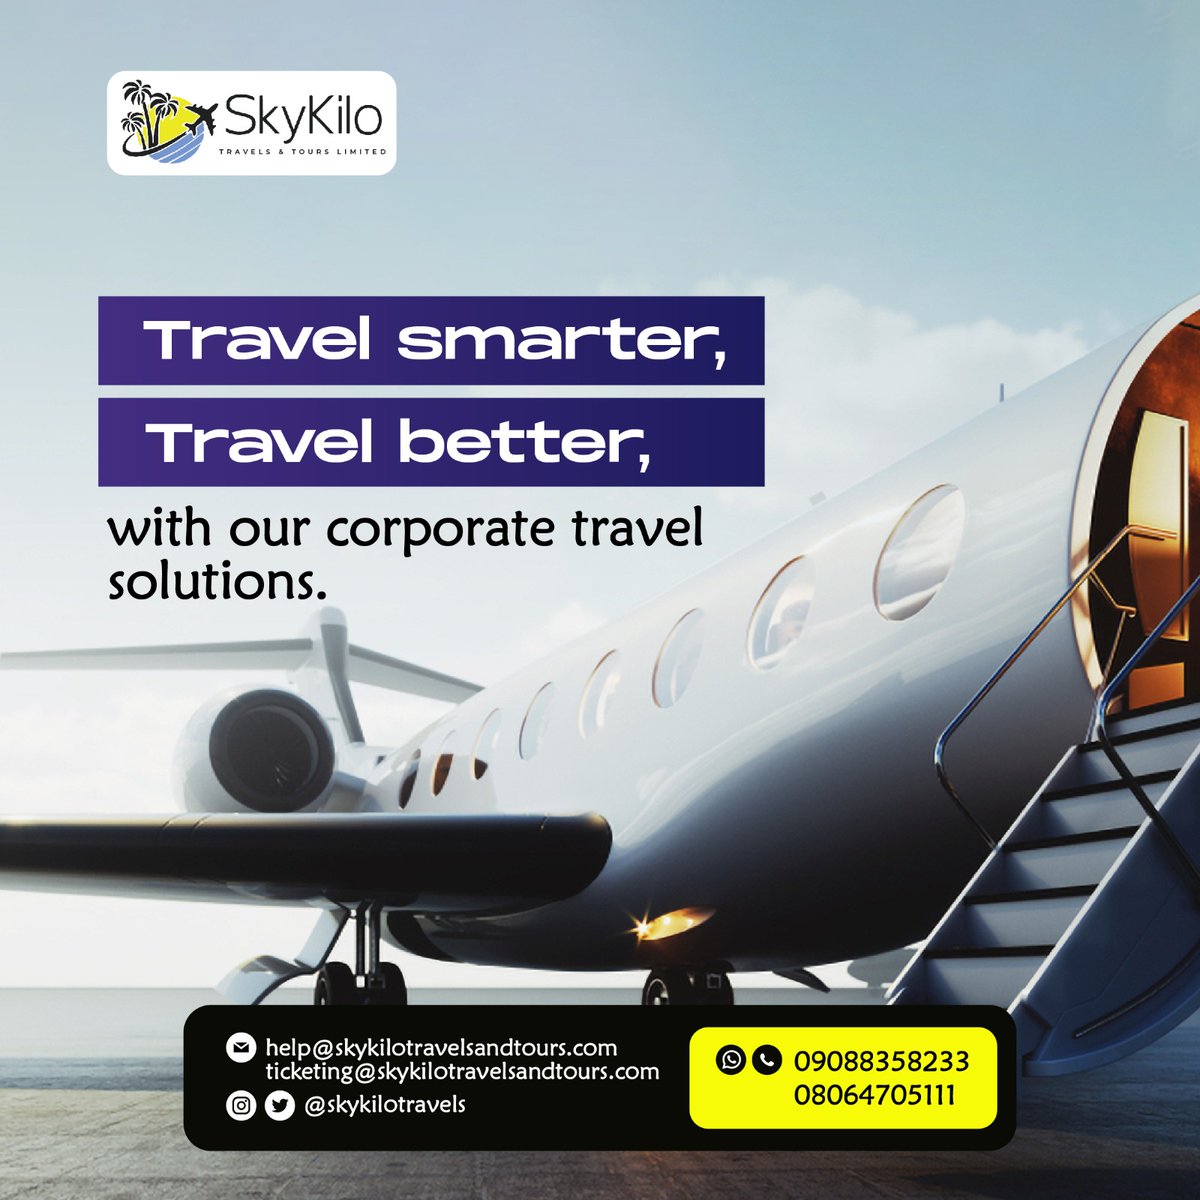 Elevate your business trips with our corporate travel solutions! Travel smarter with streamlined bookings, exclusive discounts, real-time updates, and top-notch safety measures. Focus on what truly matters while we handle the logistics! #skykilotravels  #CorporateTravel